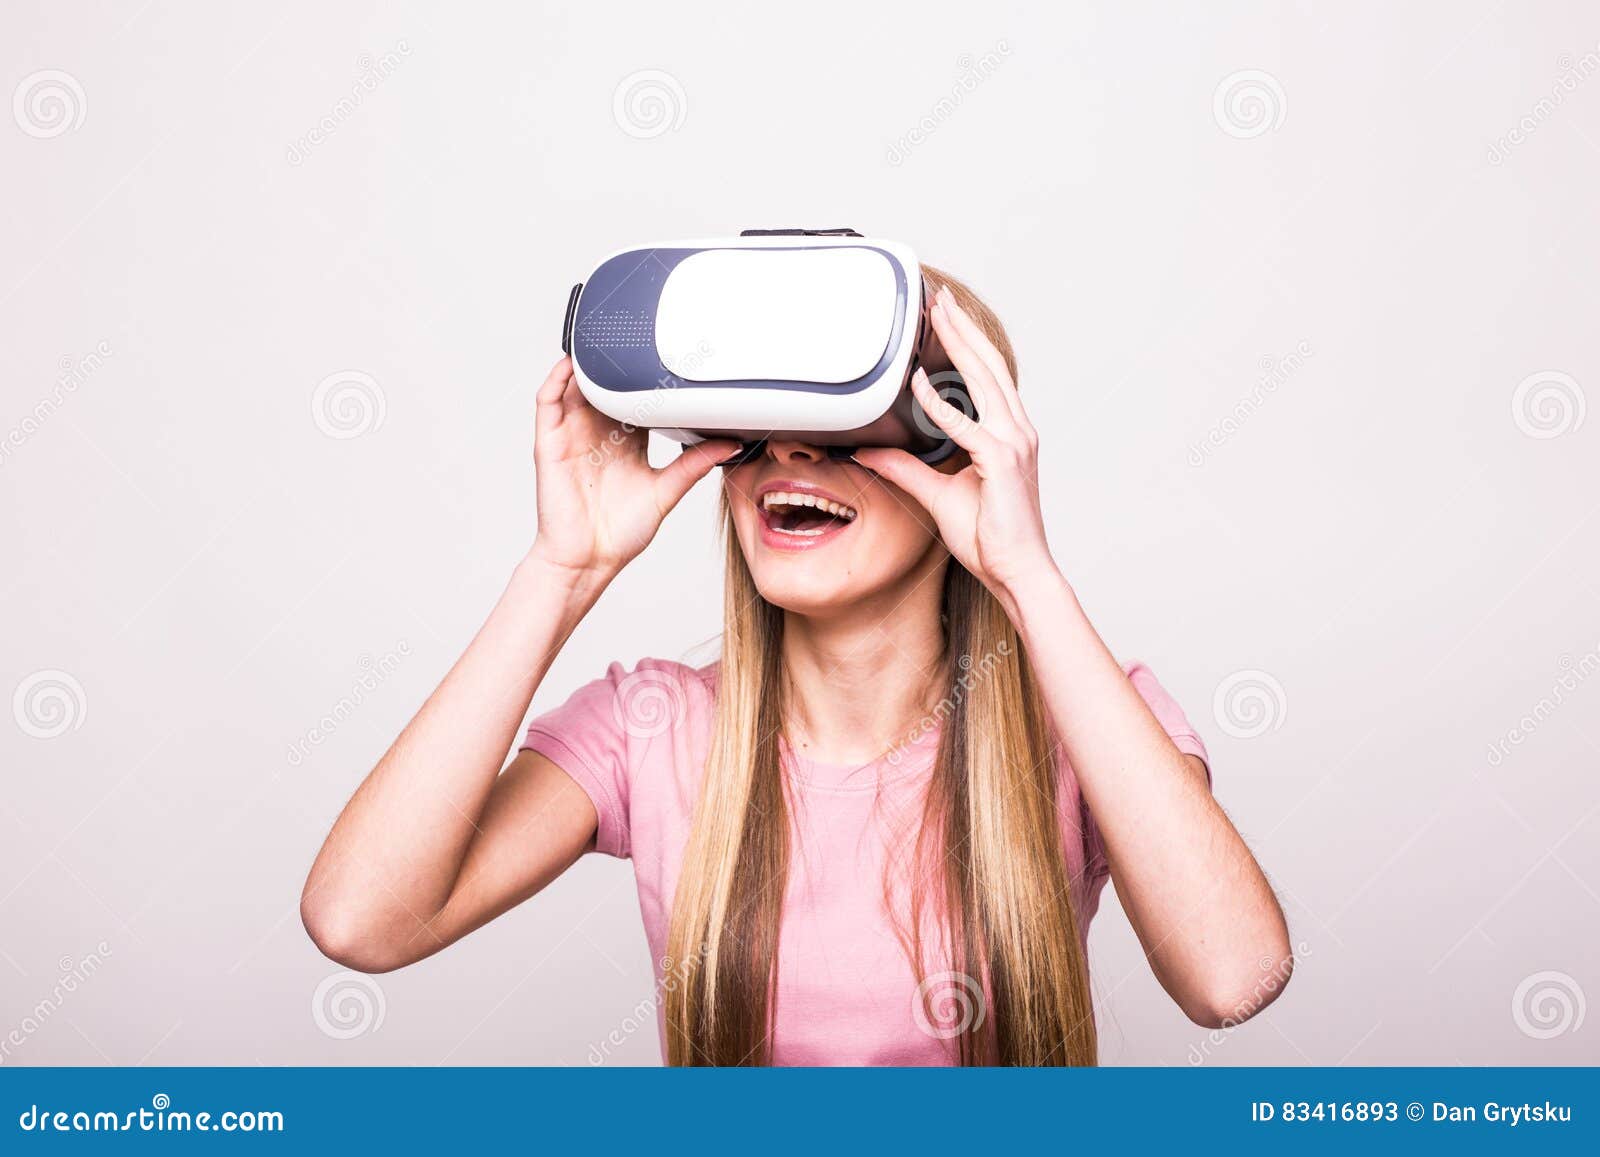 Joyful Young Girl Using A VR Headset And Smiling Stock 